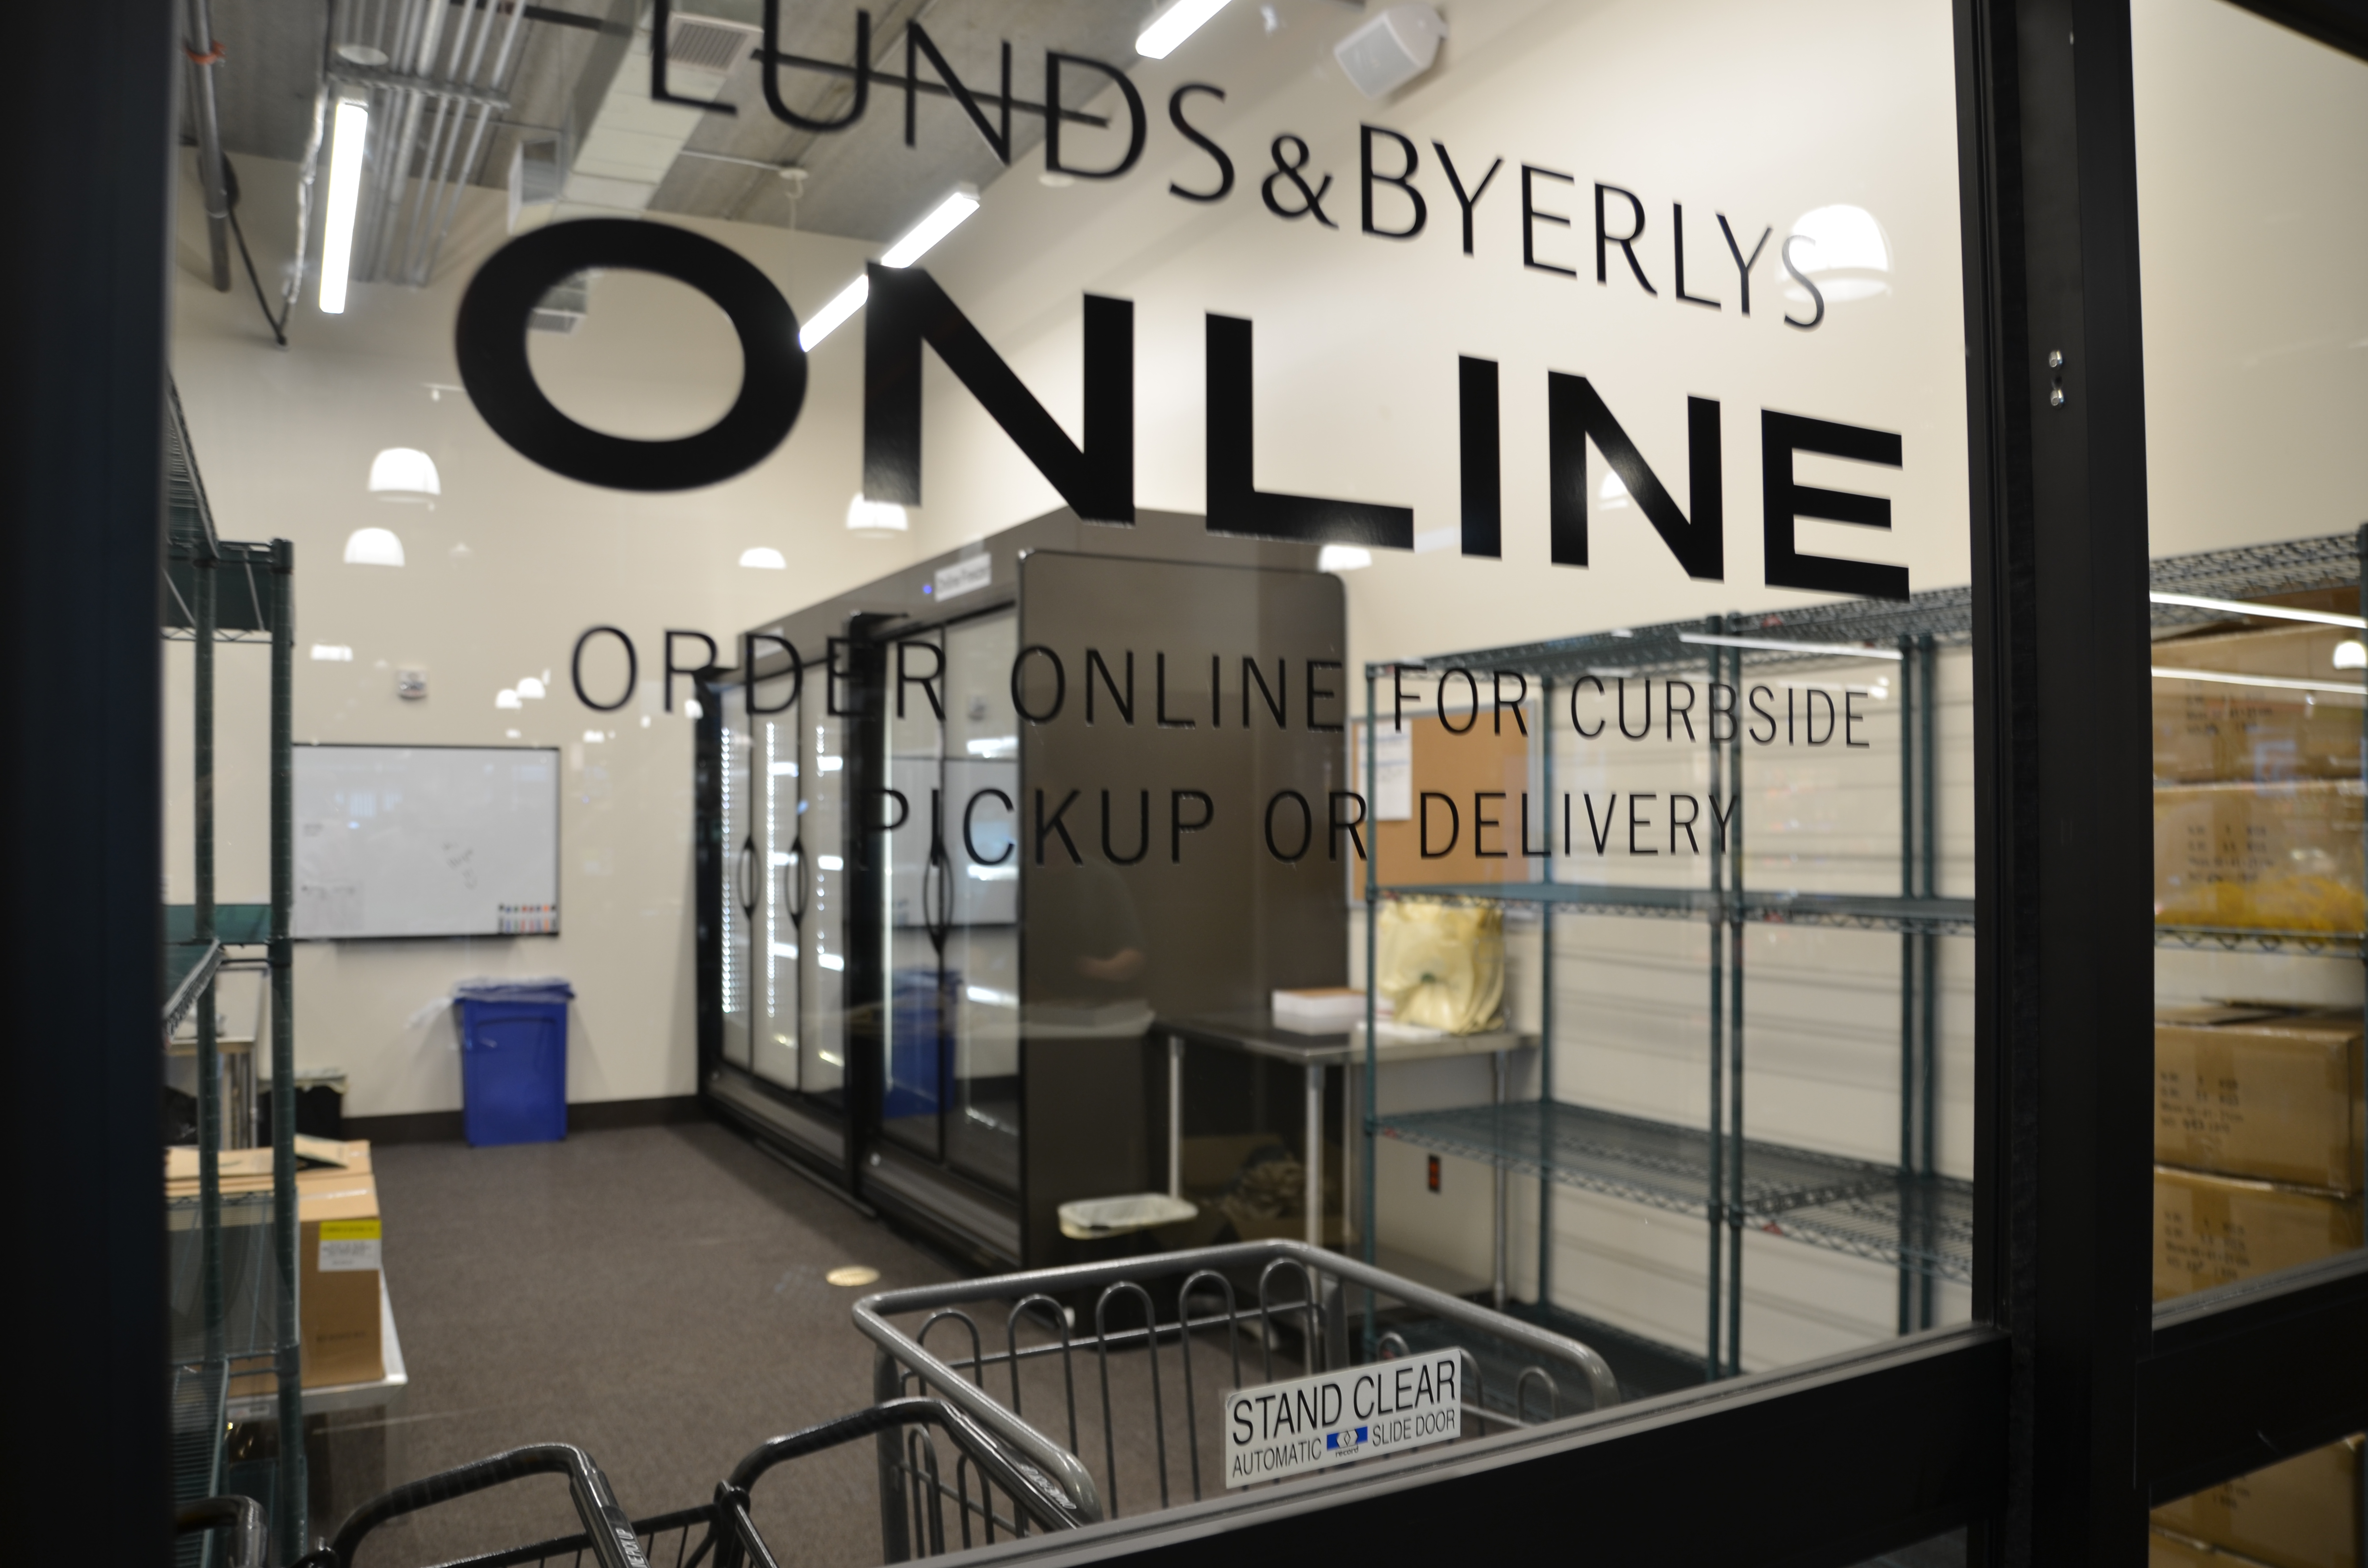 A room with shelves and refrigerators. Lunds and Byerlys online, order online for curbside pickup or delivery is written on the window.